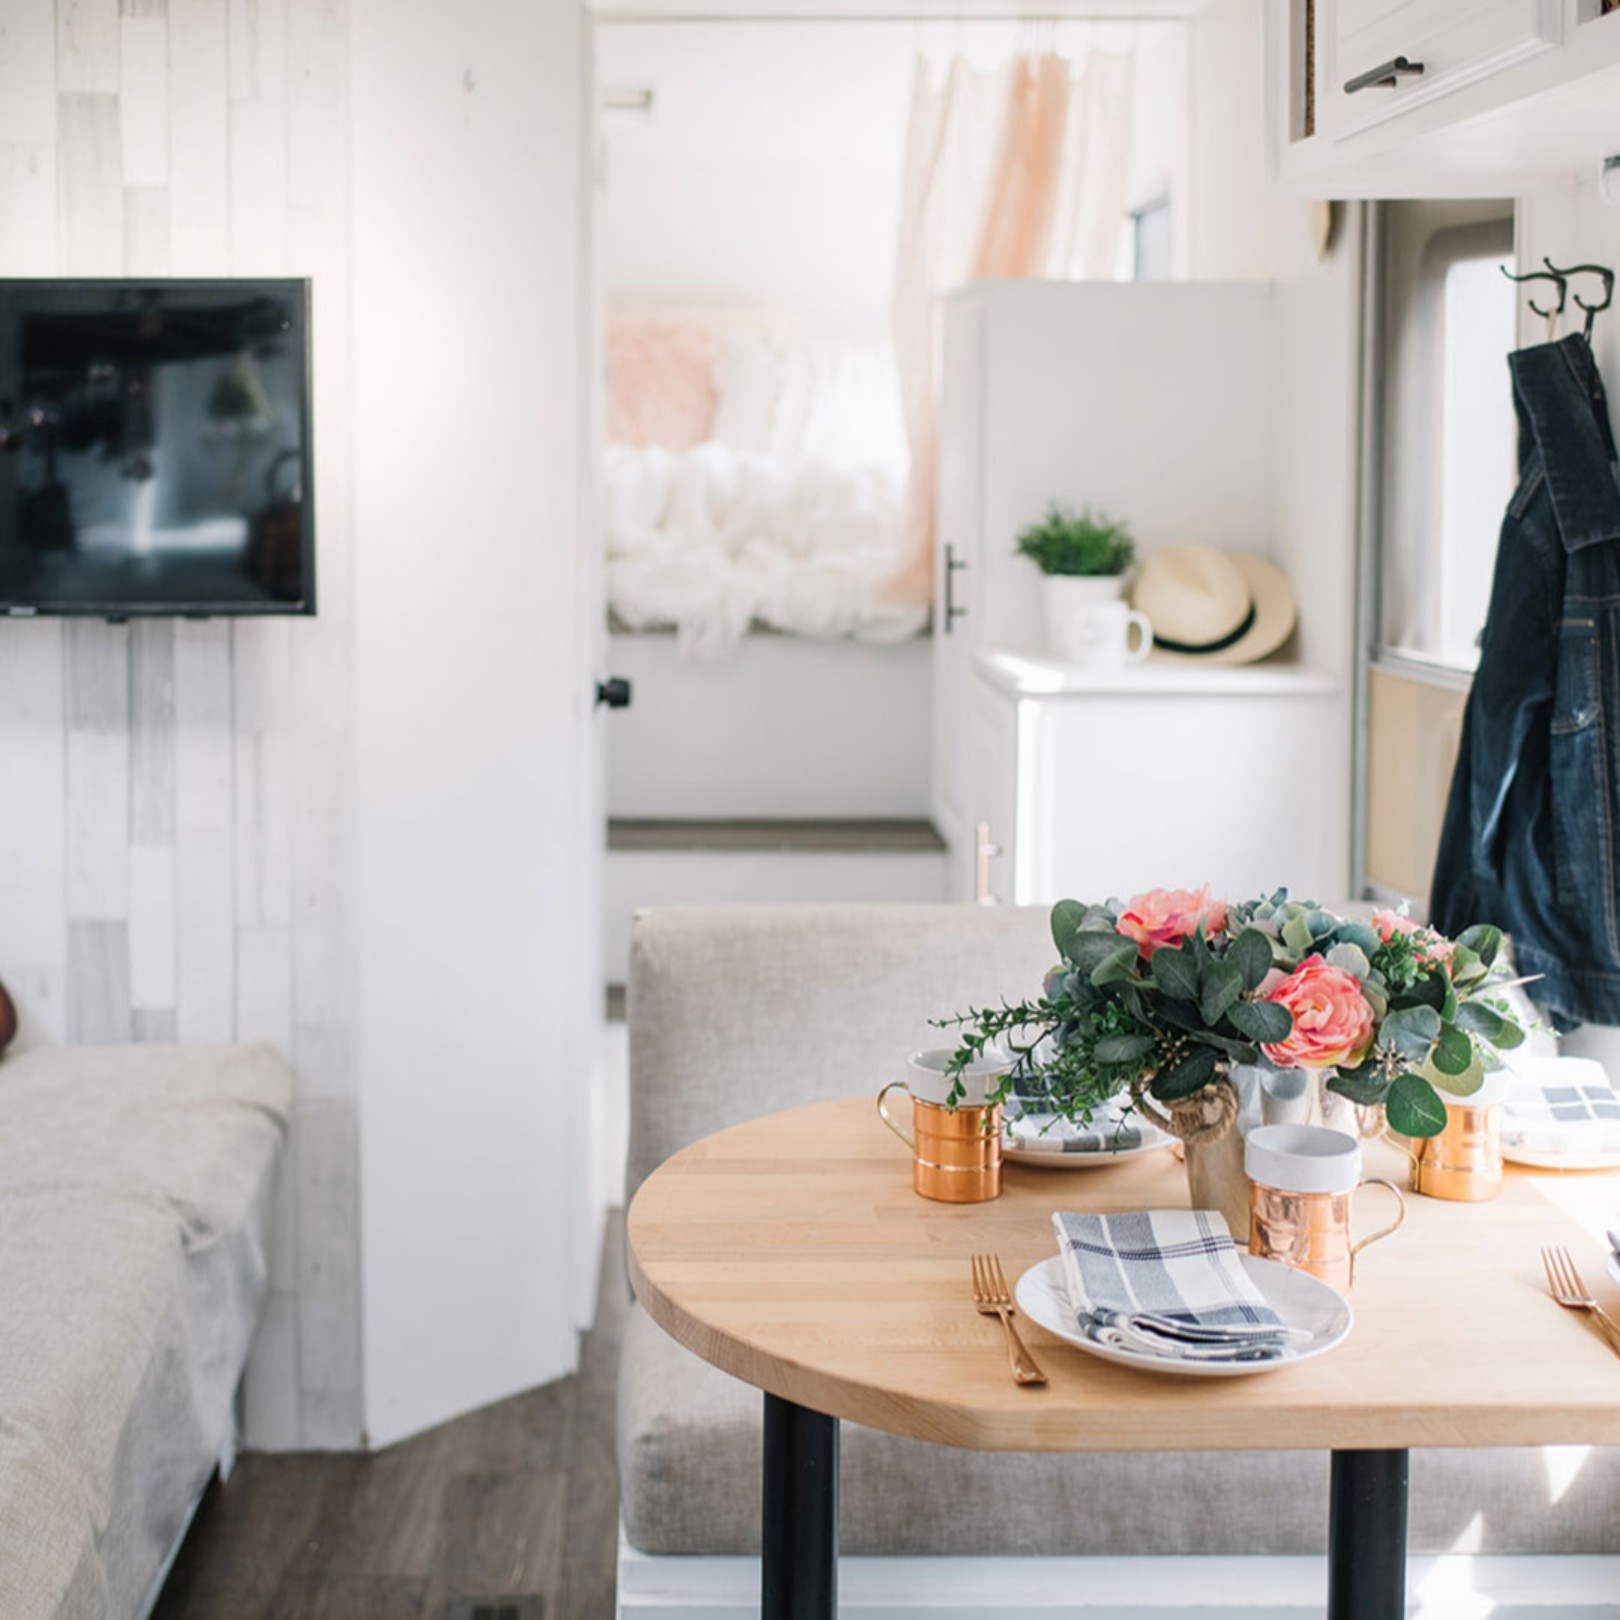 10 Best RV Remodel Ideas to transform your camper!